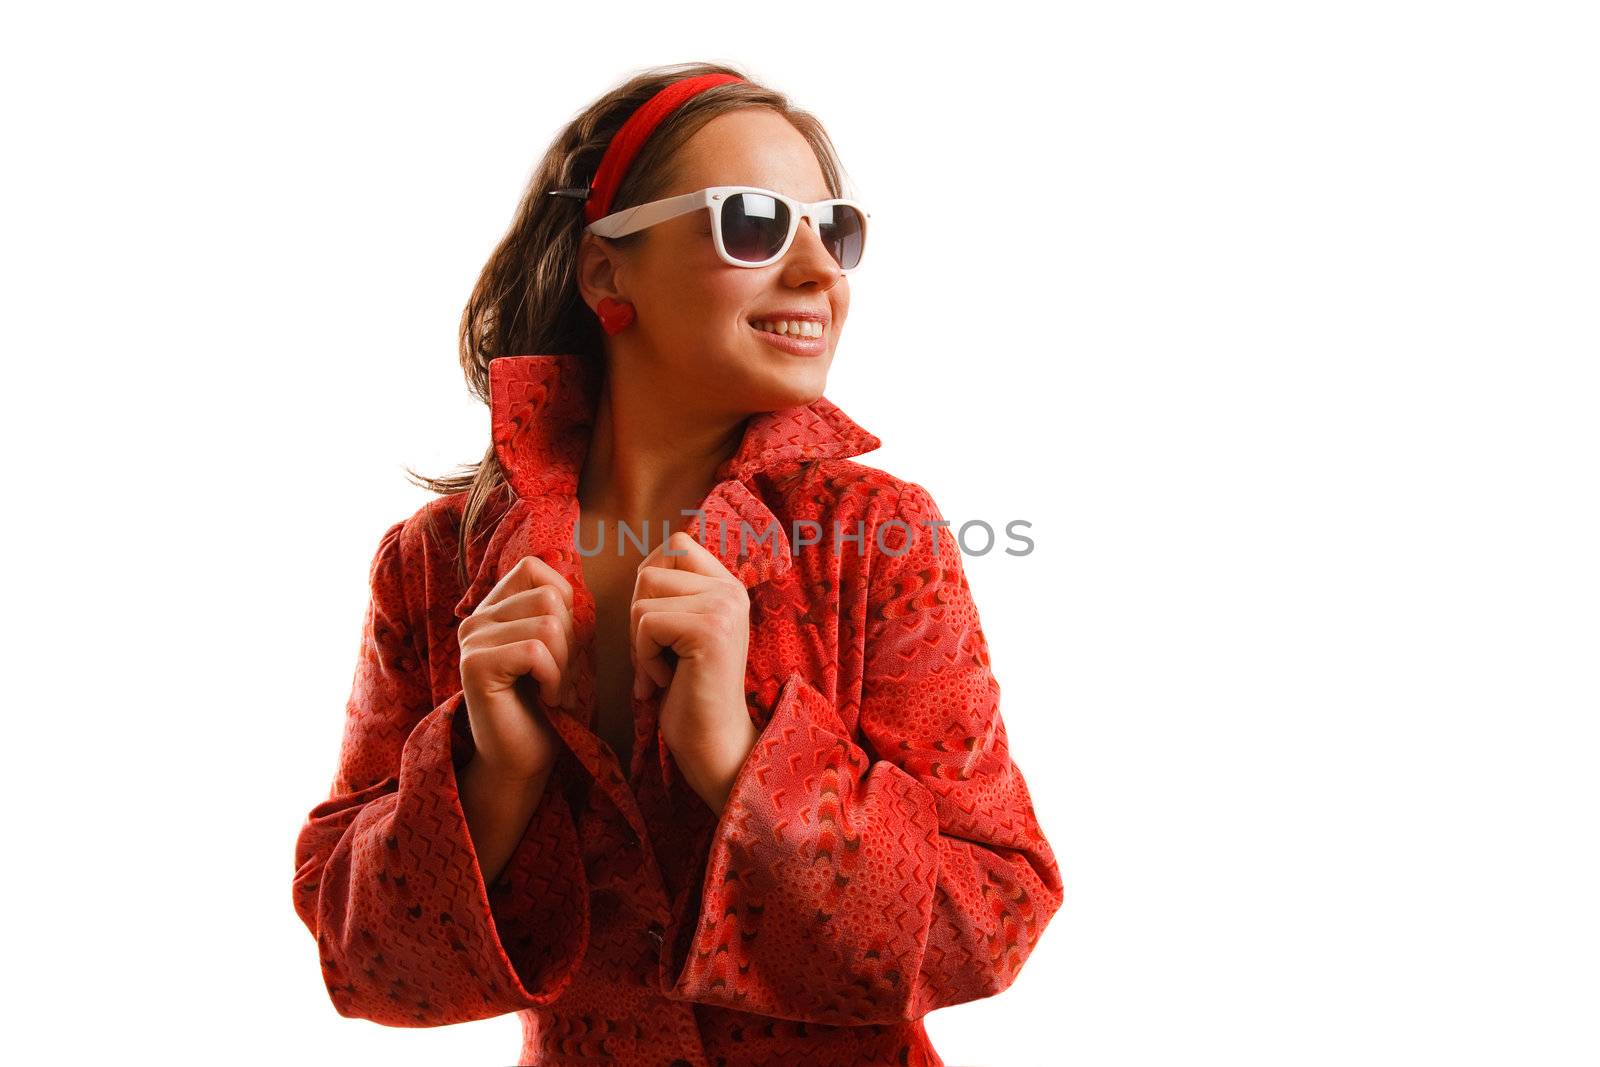 Modern looking young woman wearing a red jacket and sunglasses